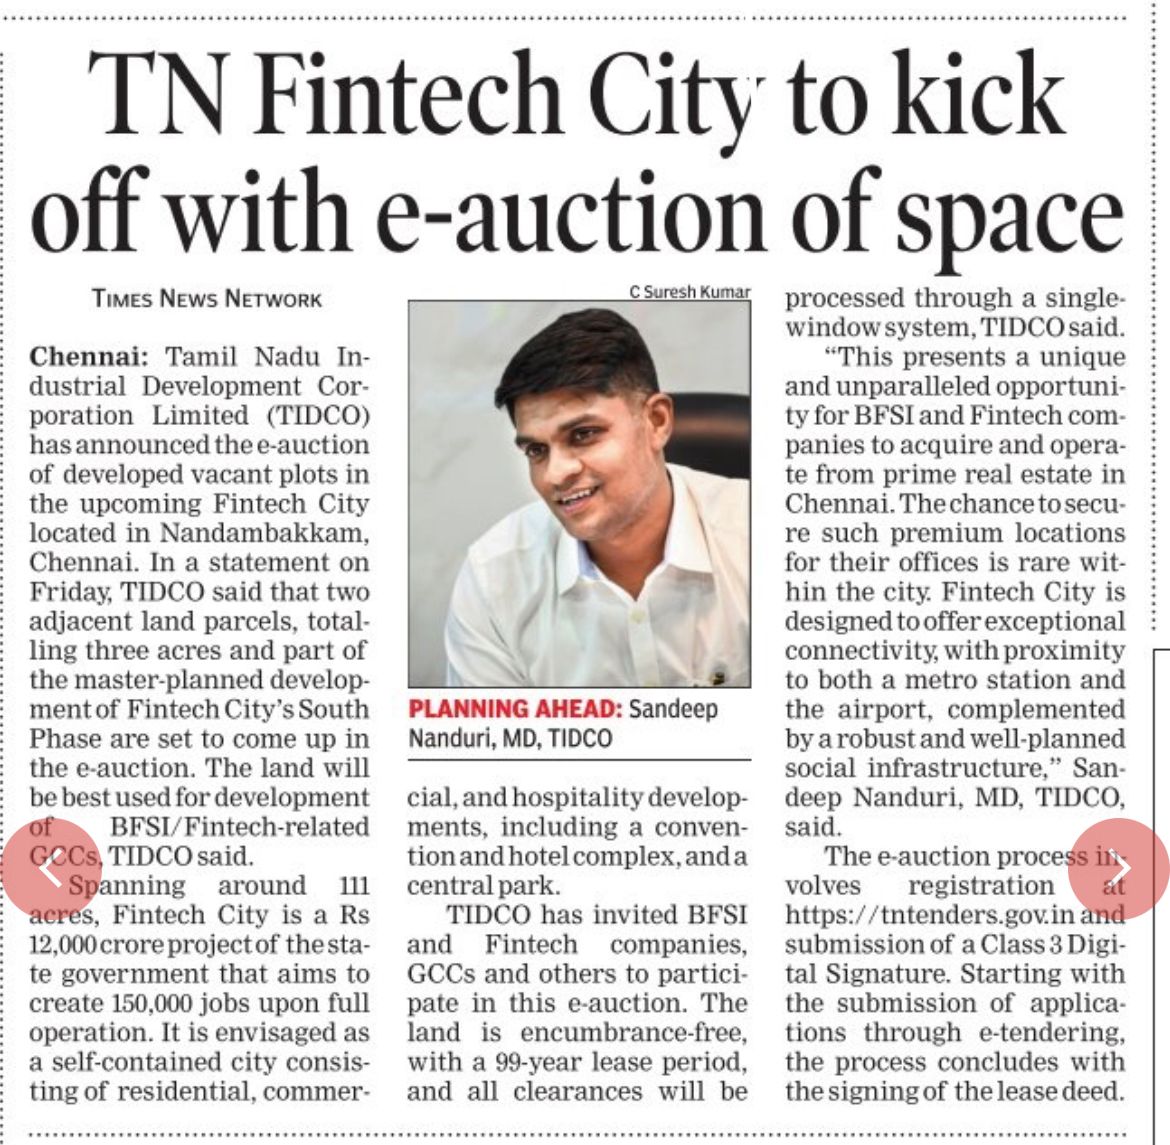 TIDCO has invited BFSI and Fintech companies, GCCs and real estate developers (end usage for BFSI/Fintech companies) to participate e-auction, offering an unparalleled chance to be part of state of the art Fintech City @TIDCO_1965